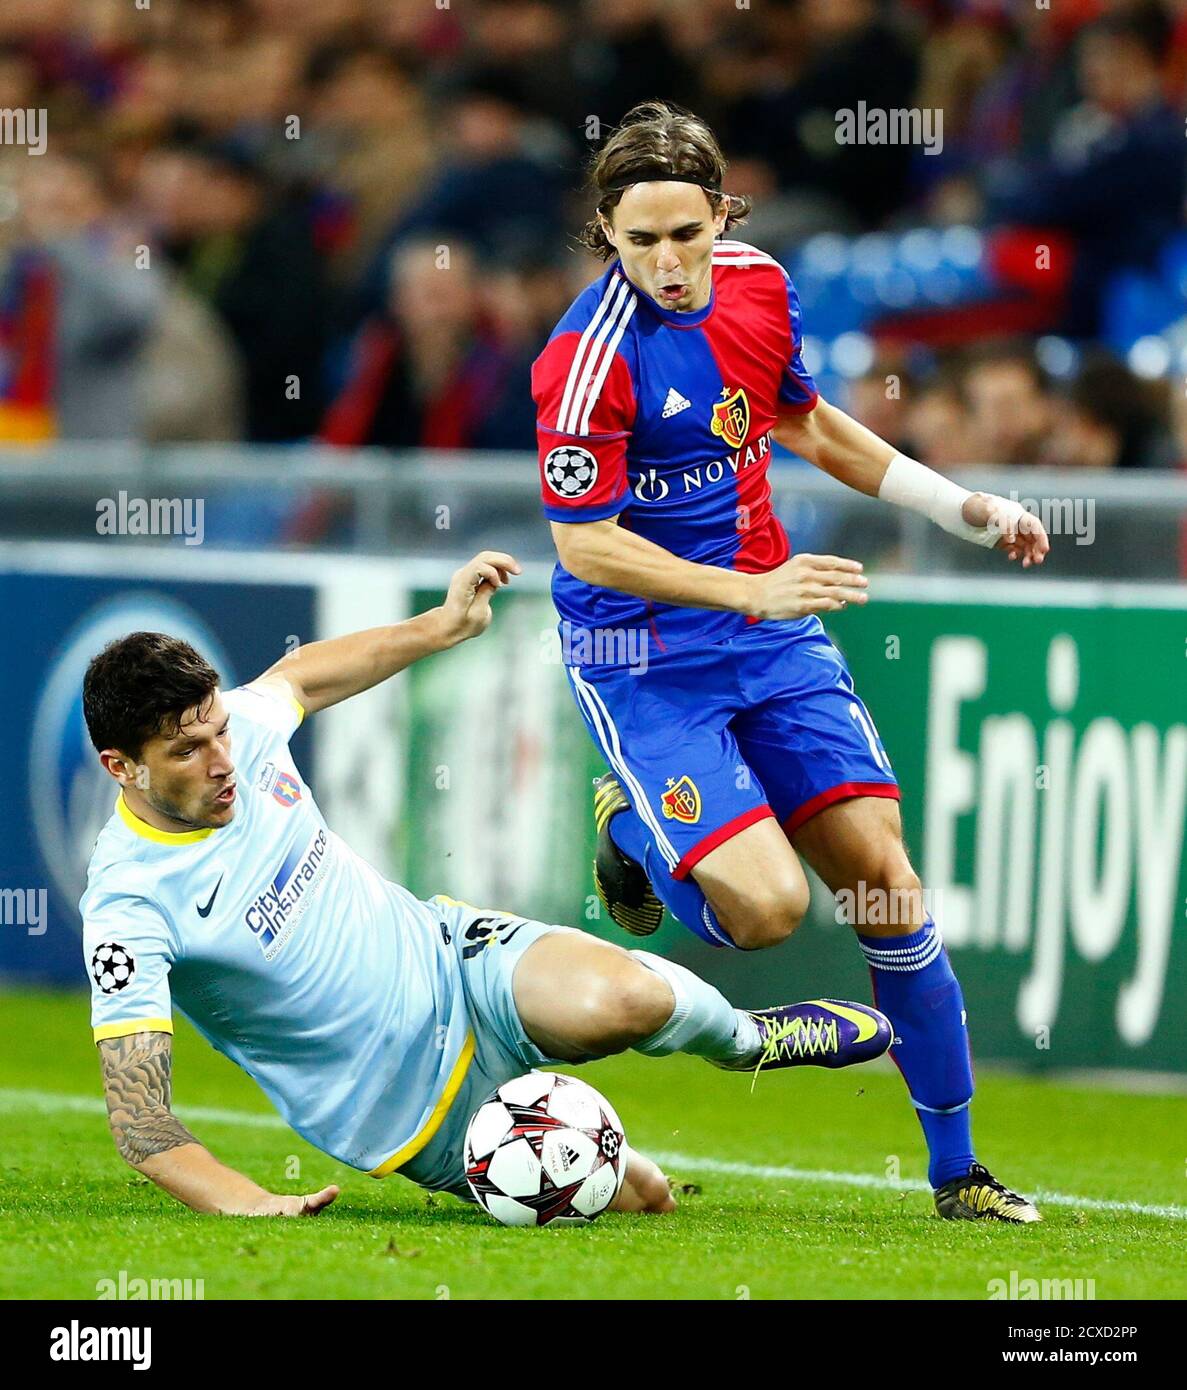 FC Basel's Kay Voser challenges Steaua Bucharest's Cristian Tanase (L)  during their Champions League Group E soccer match at St. Jakob-Park in  Basel November 6, 2013. REUTERS/Ruben Sprich (SWITZERLAND - Tags: SPORT